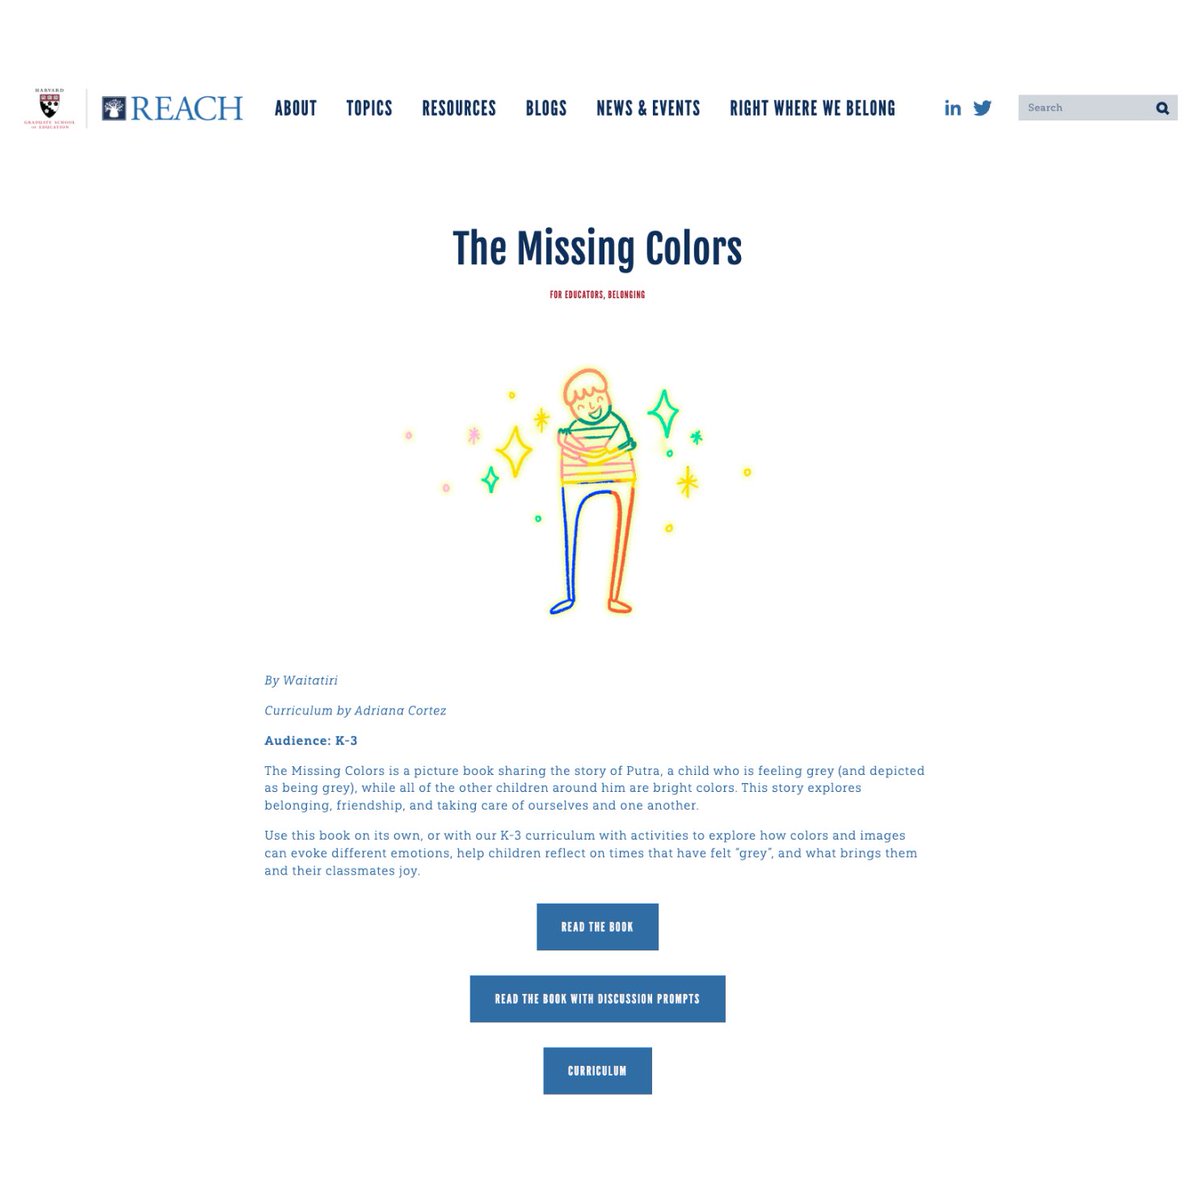 my first children’s book, “The Missing Colors”, is officially listed as a resource for educators on Harvard’s REACH website🥺 we have a whole curriculum based on this book for K-3 educators!!!  Alhamdulillah 🥺😭